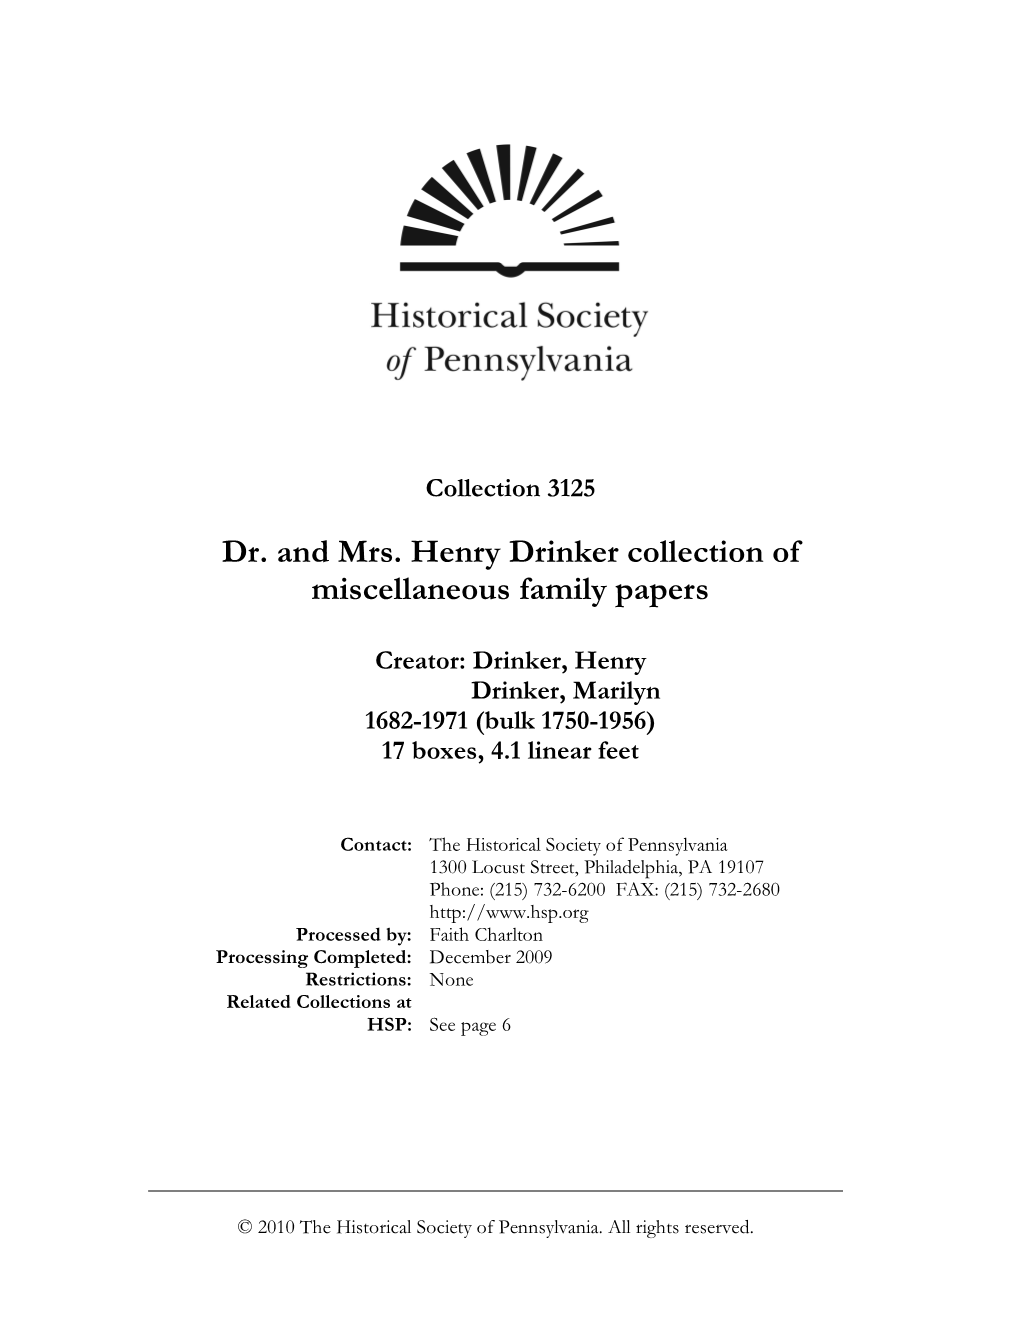 Henry Drinker Collection of Miscellaneous Family Papers